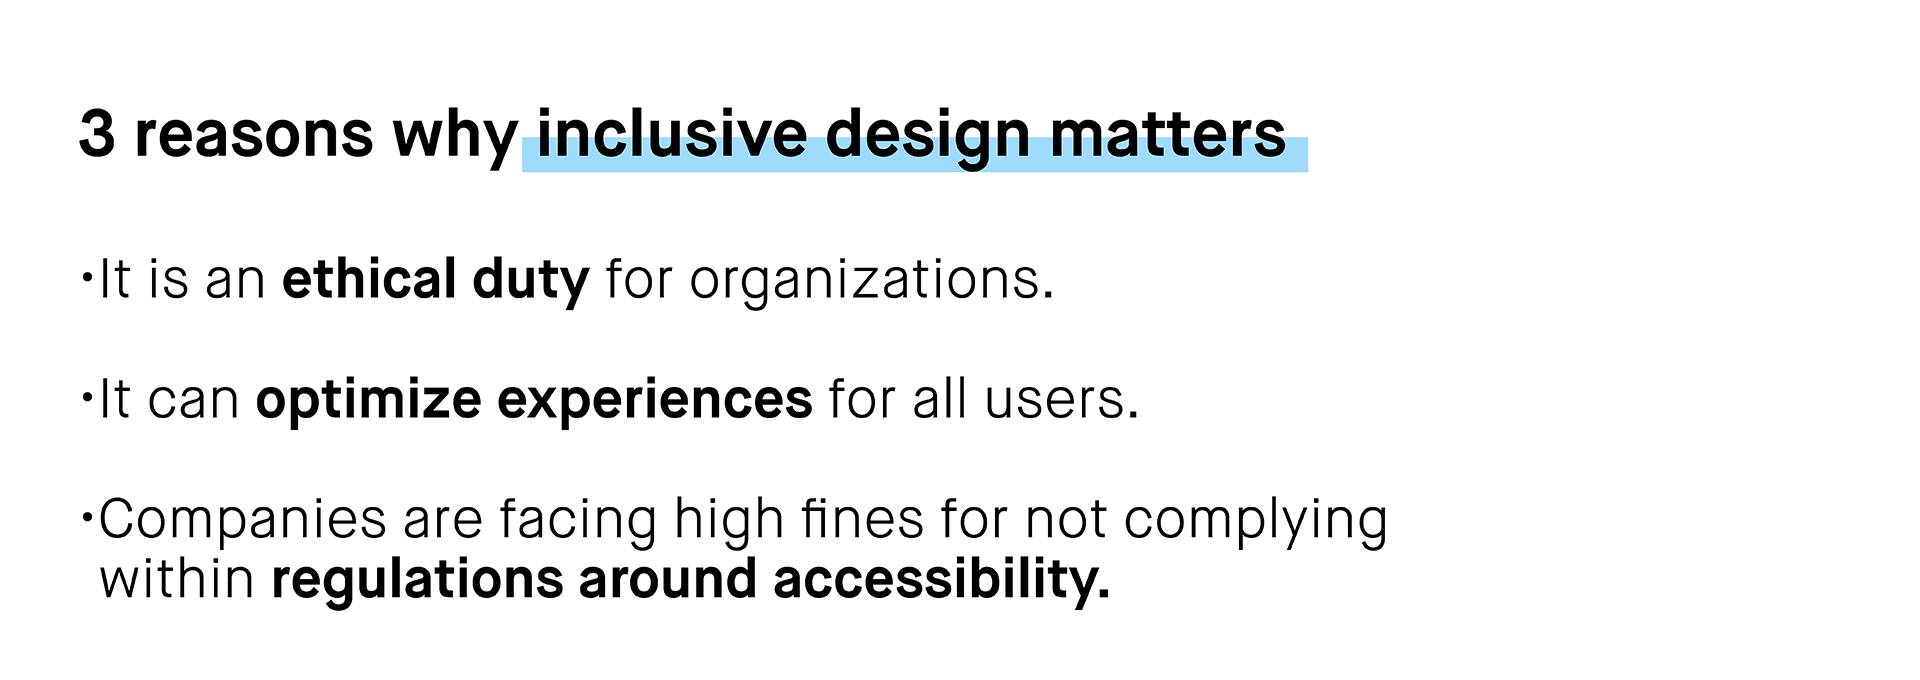 3 reasons why inclusive design matters